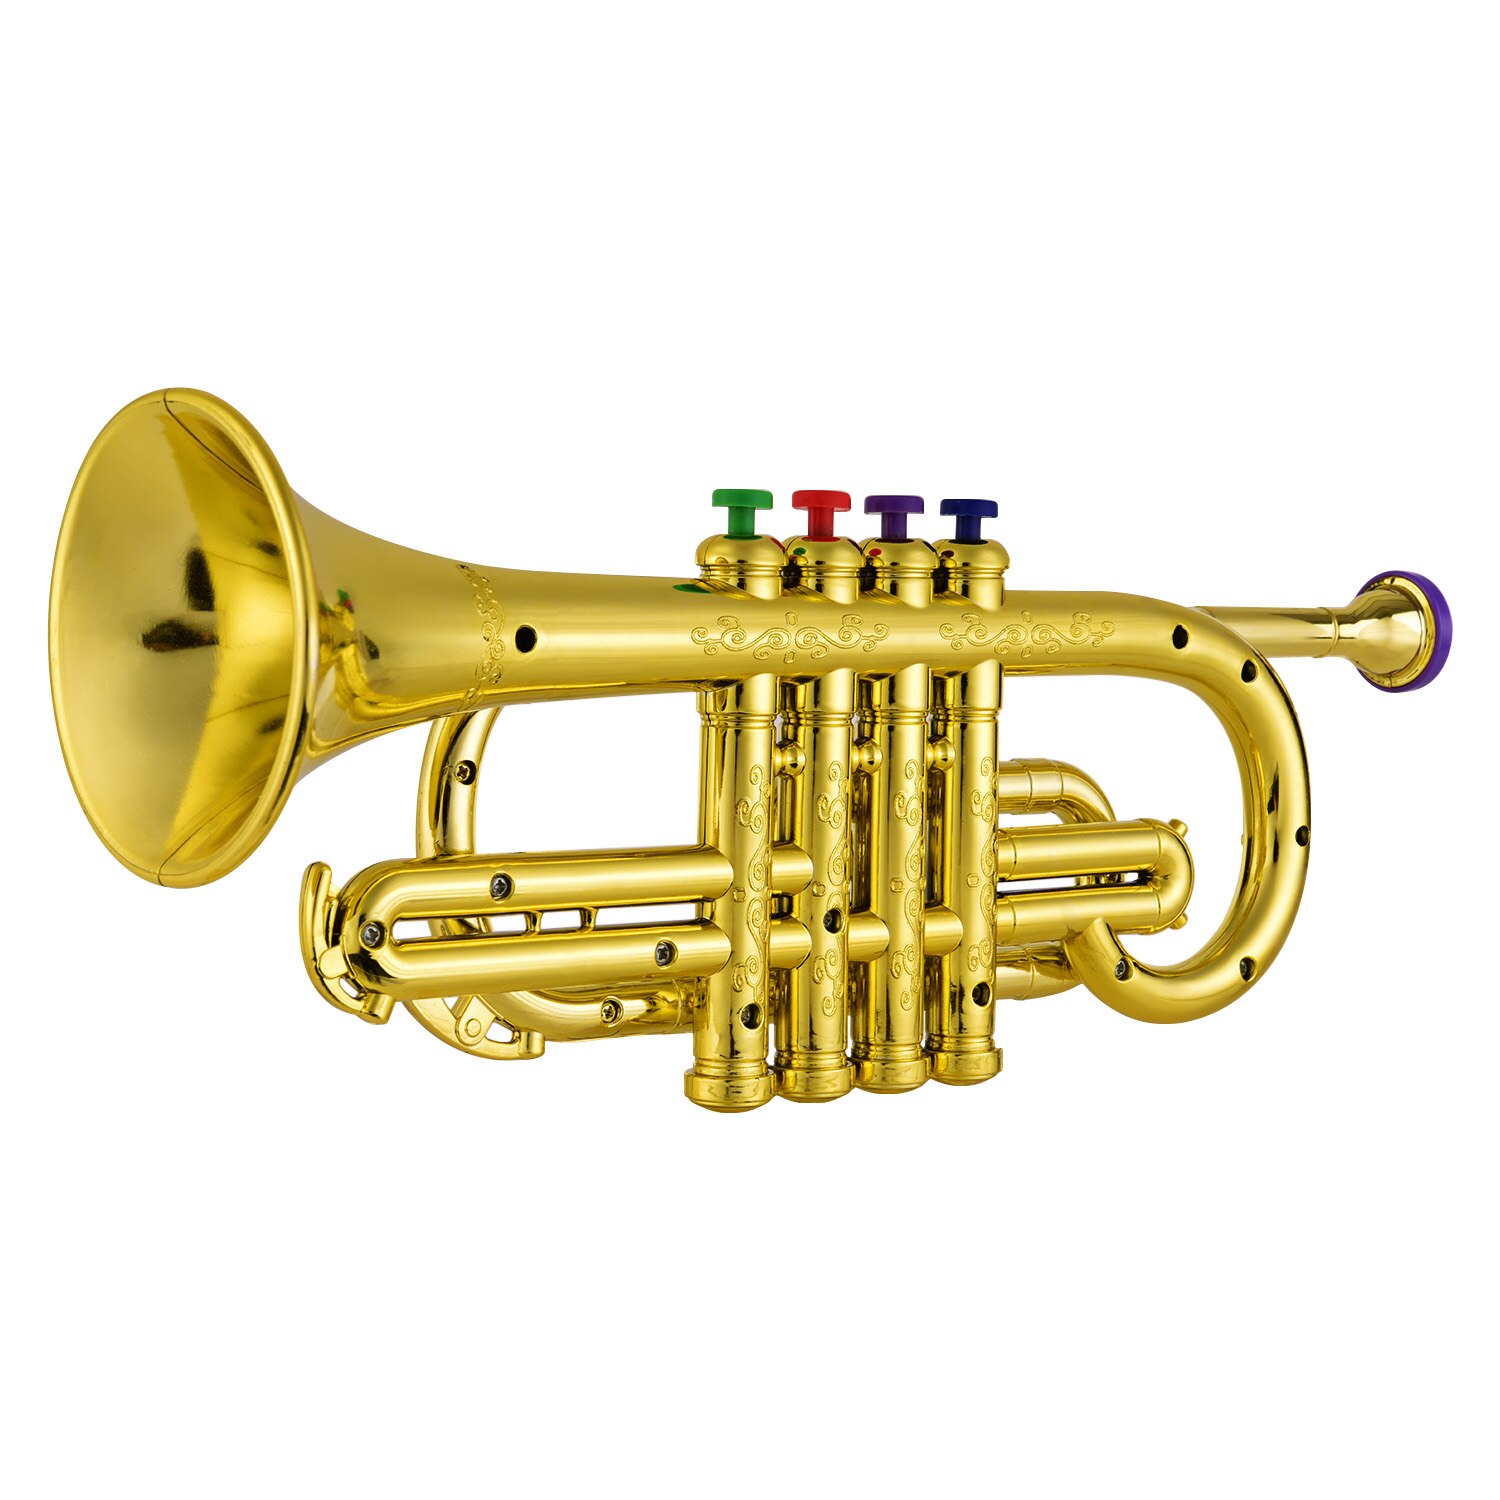 Trumpet Kids Musical Educational toy Wind Instruments ABS Metallic Gold Trumpet with 4 Colored Keys for Kids Children: Default Title